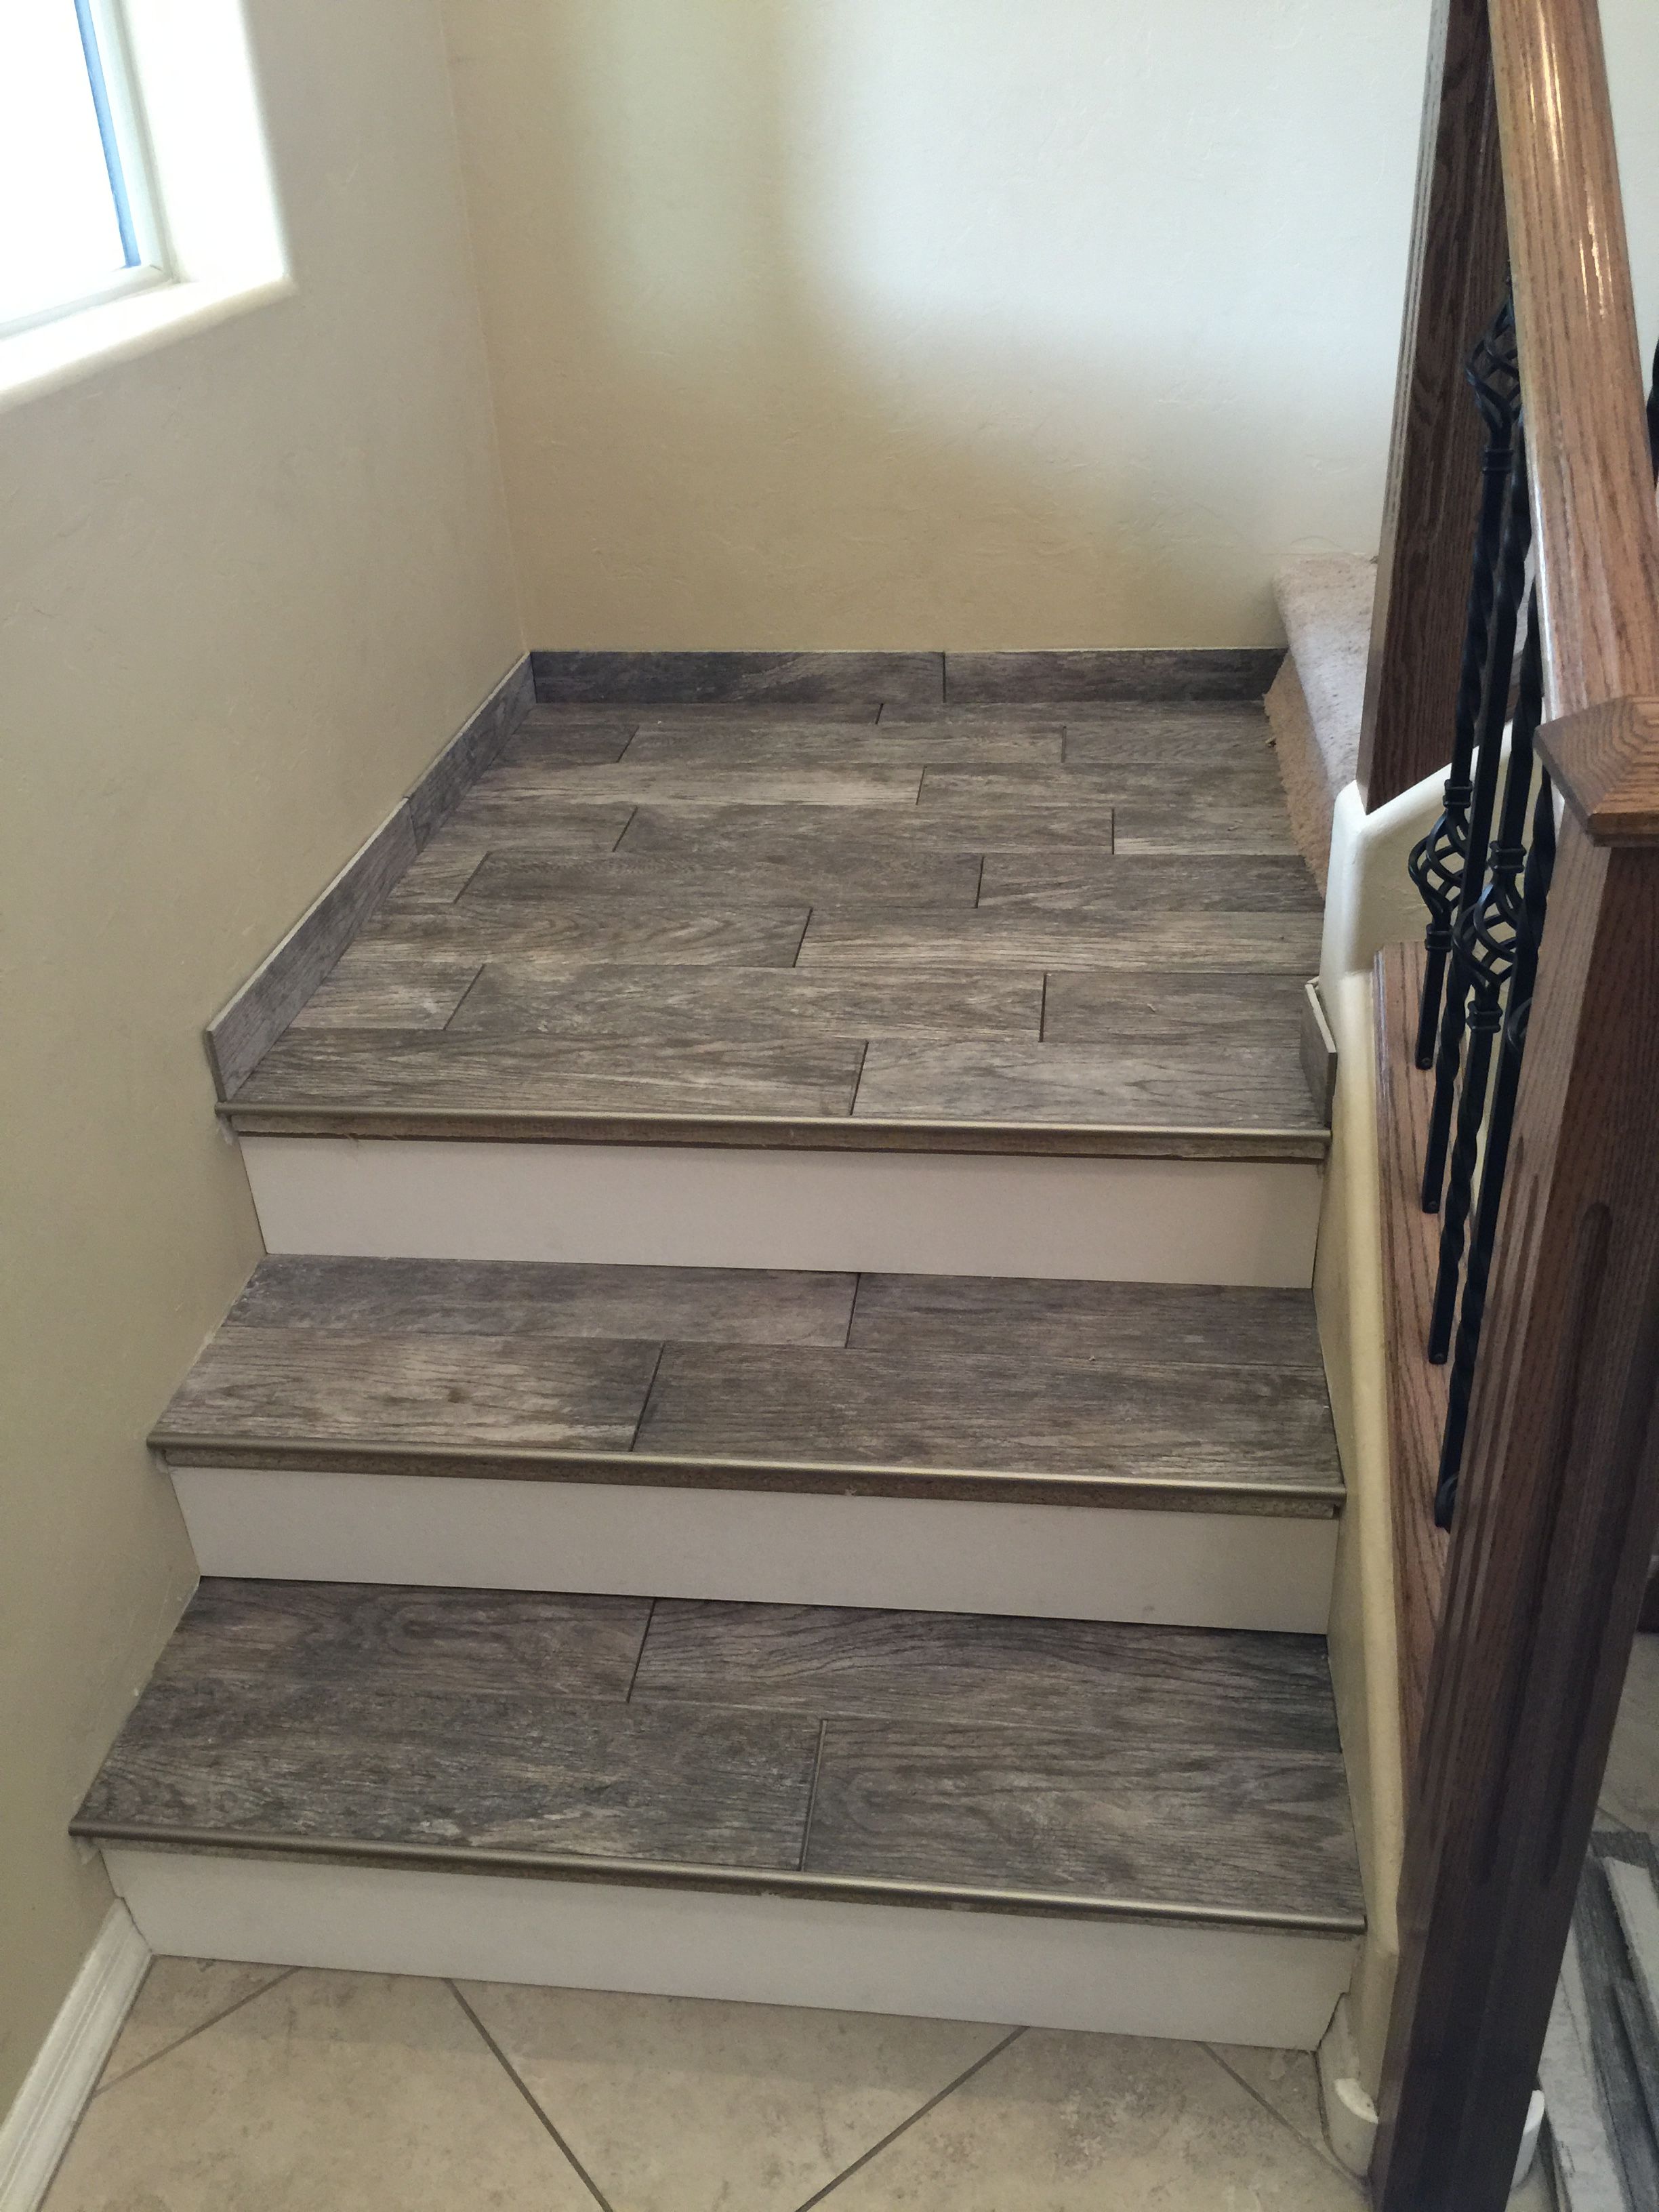 Porcelain wood look tile stairs | Design and build | Pinterest ...